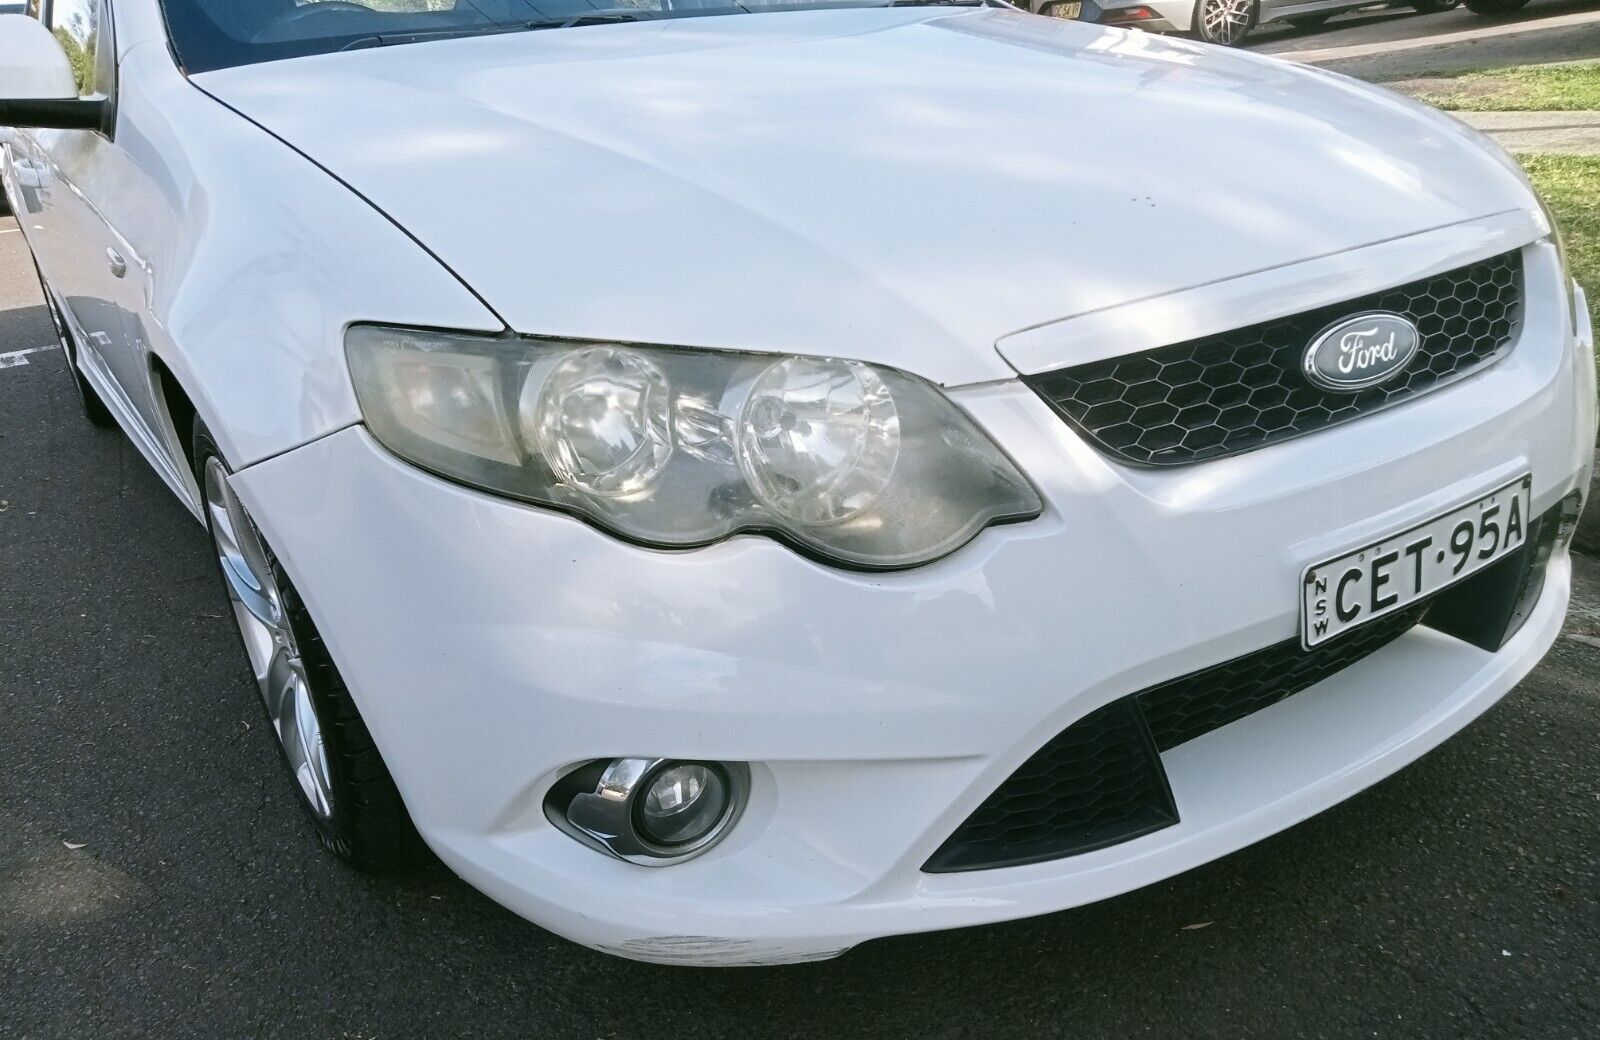 FORD Falcon  2010 XR6  / Odo: 106,000kms / Auto / 6 months renewal registration